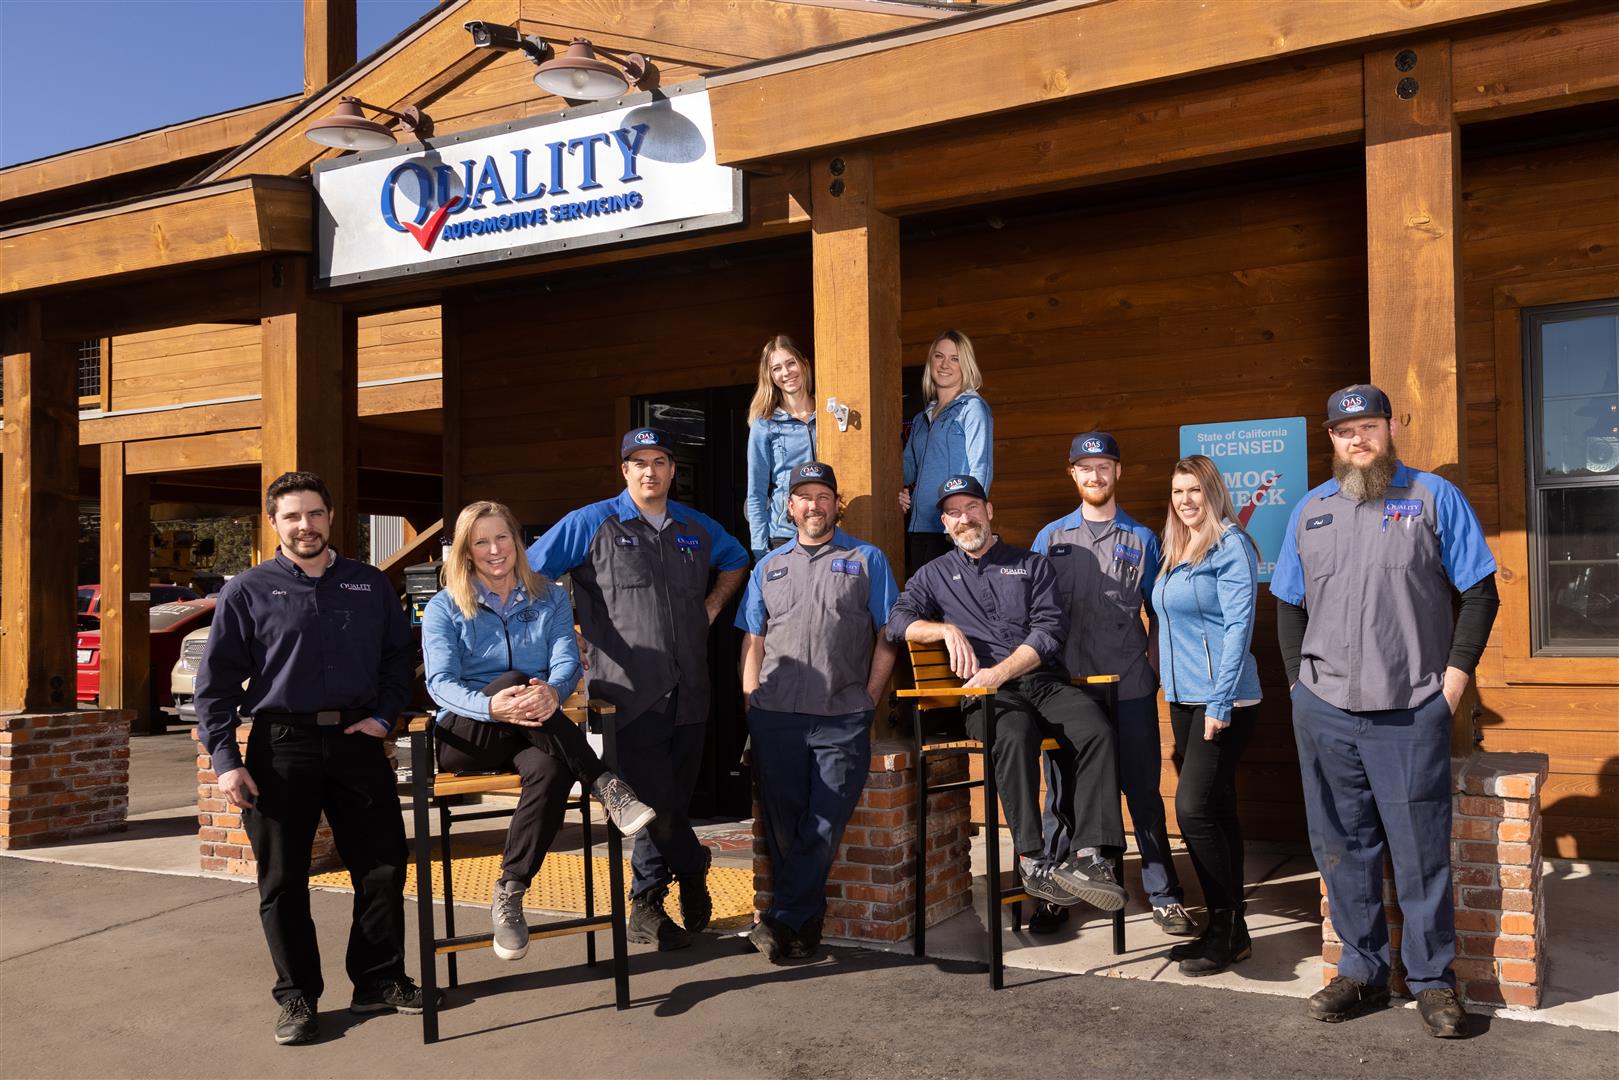 Why Your Truckee Auto Needs Full-Service, Premium Mountain Maintenance at Quality Automotive Servicing